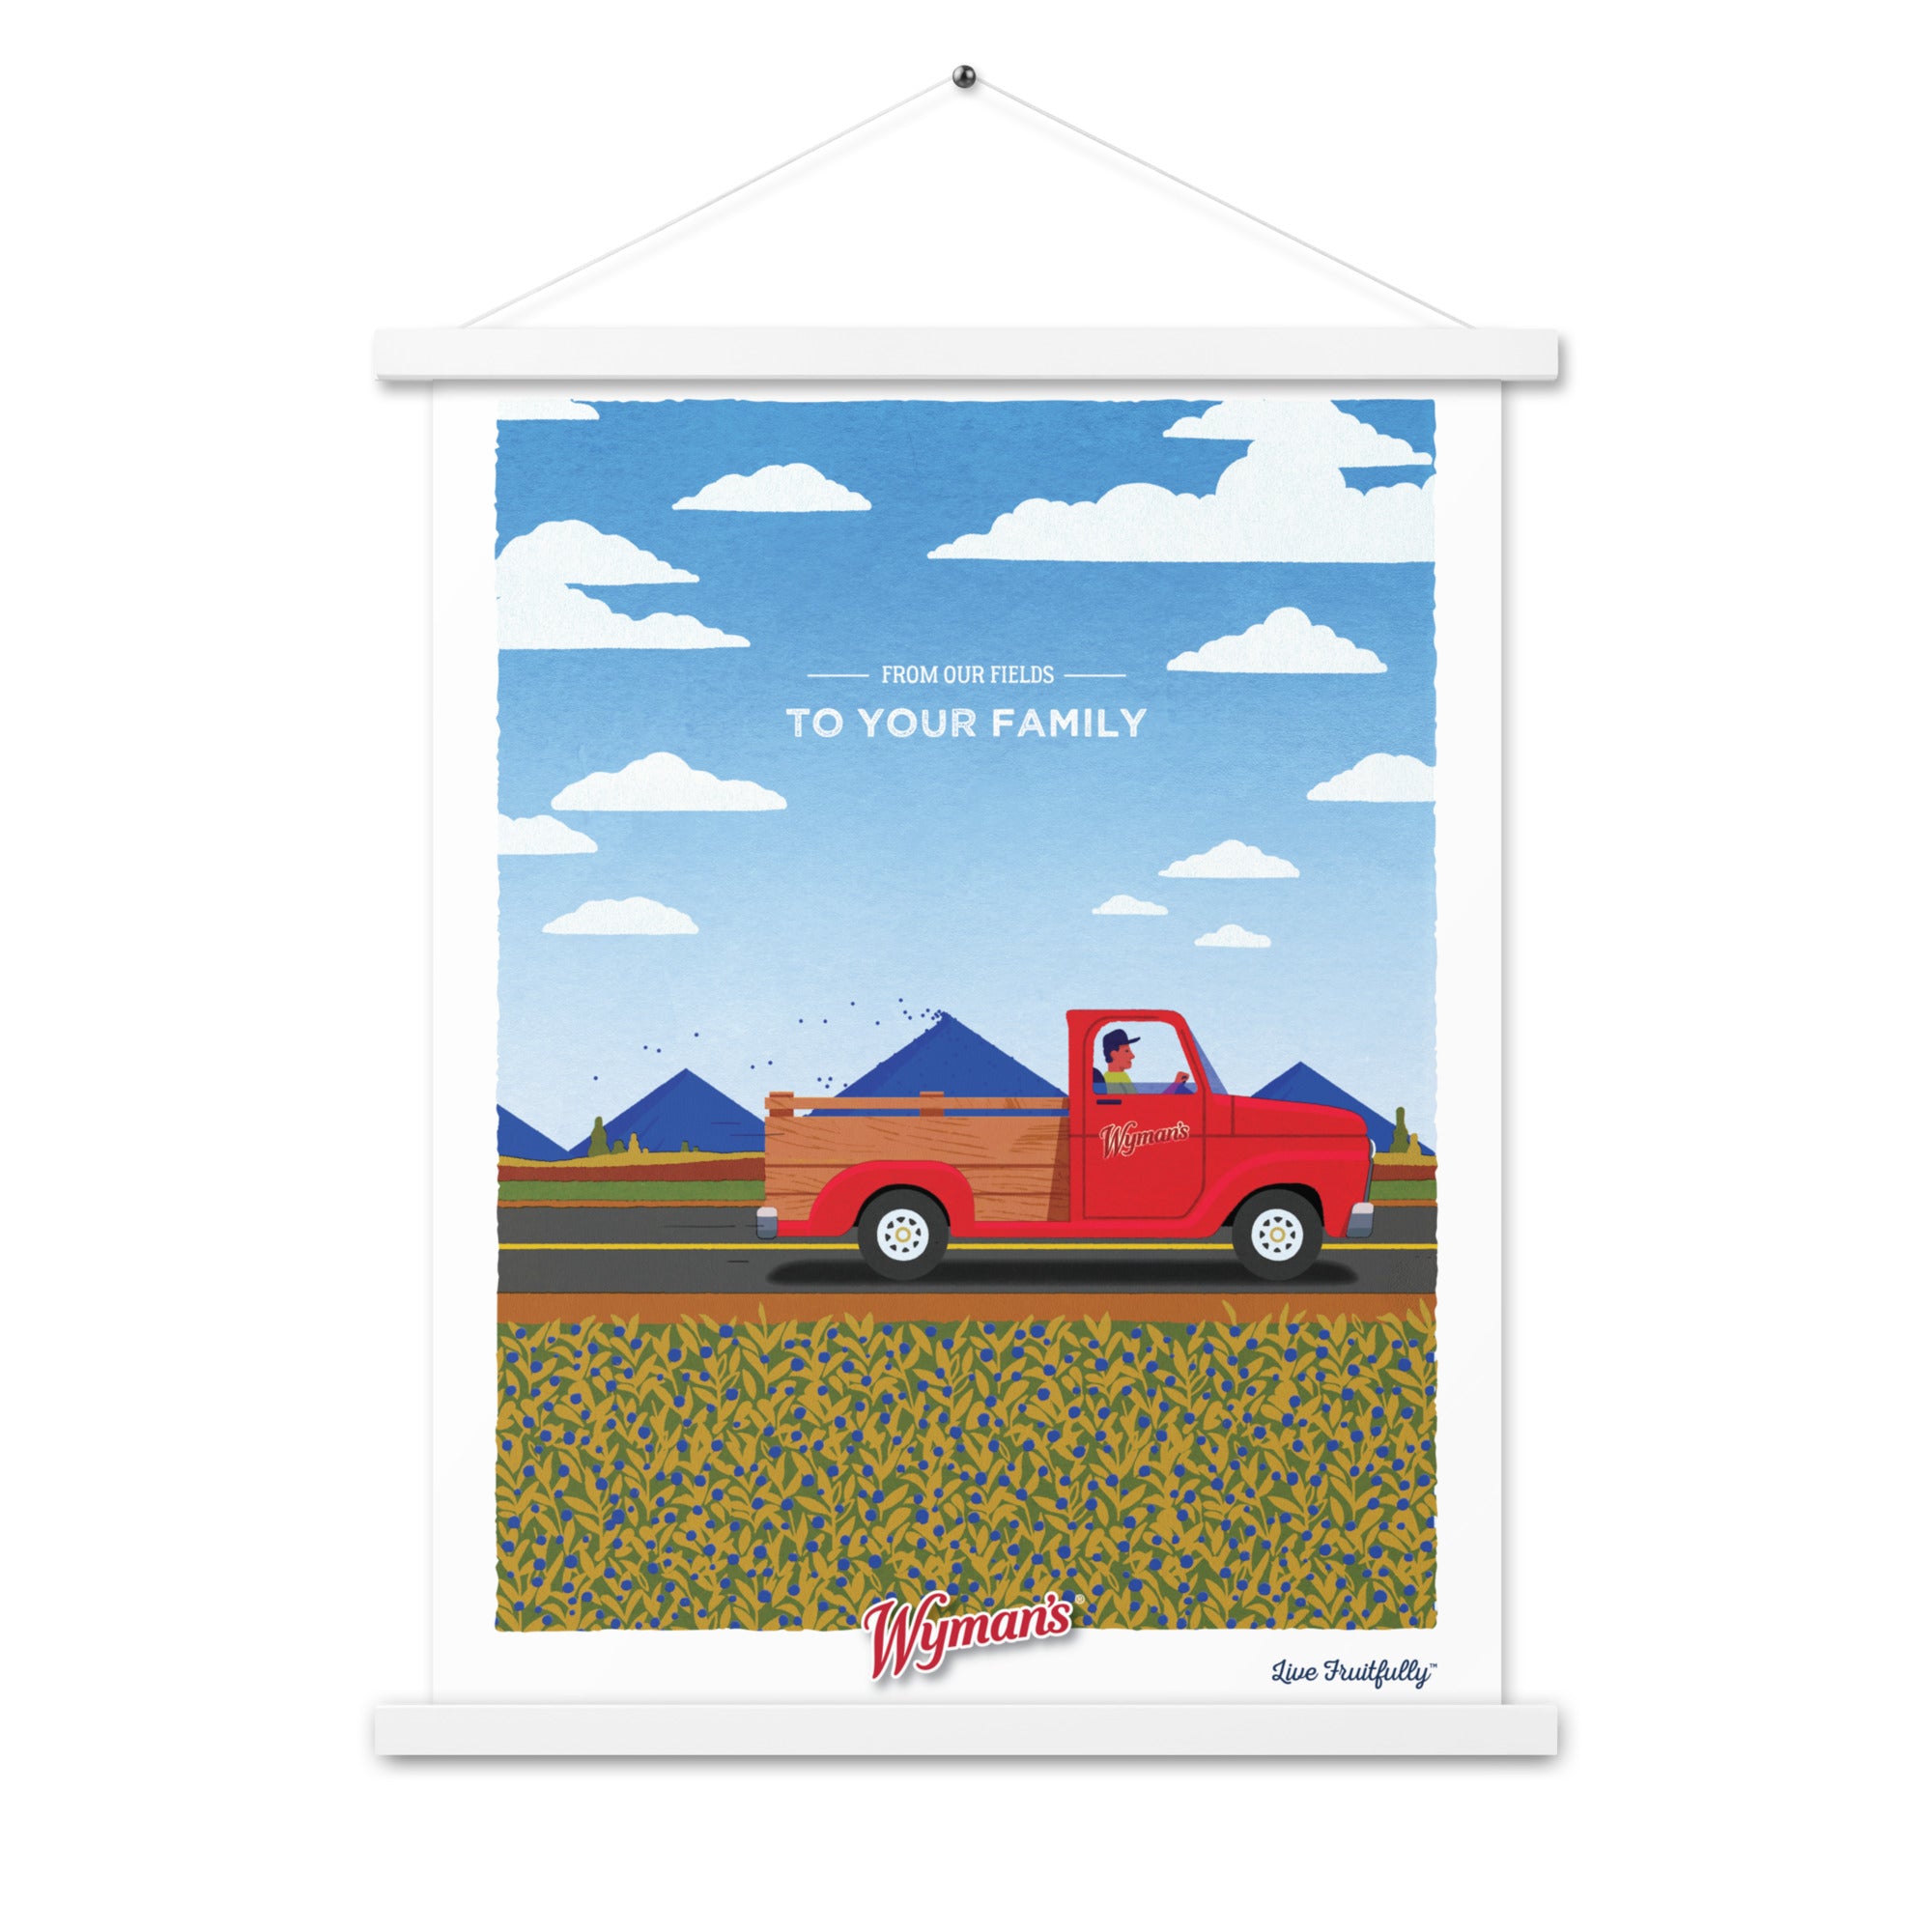 A Shop Wyman's poster with a red truck in the middle of a field, featuring an eye-catching design.